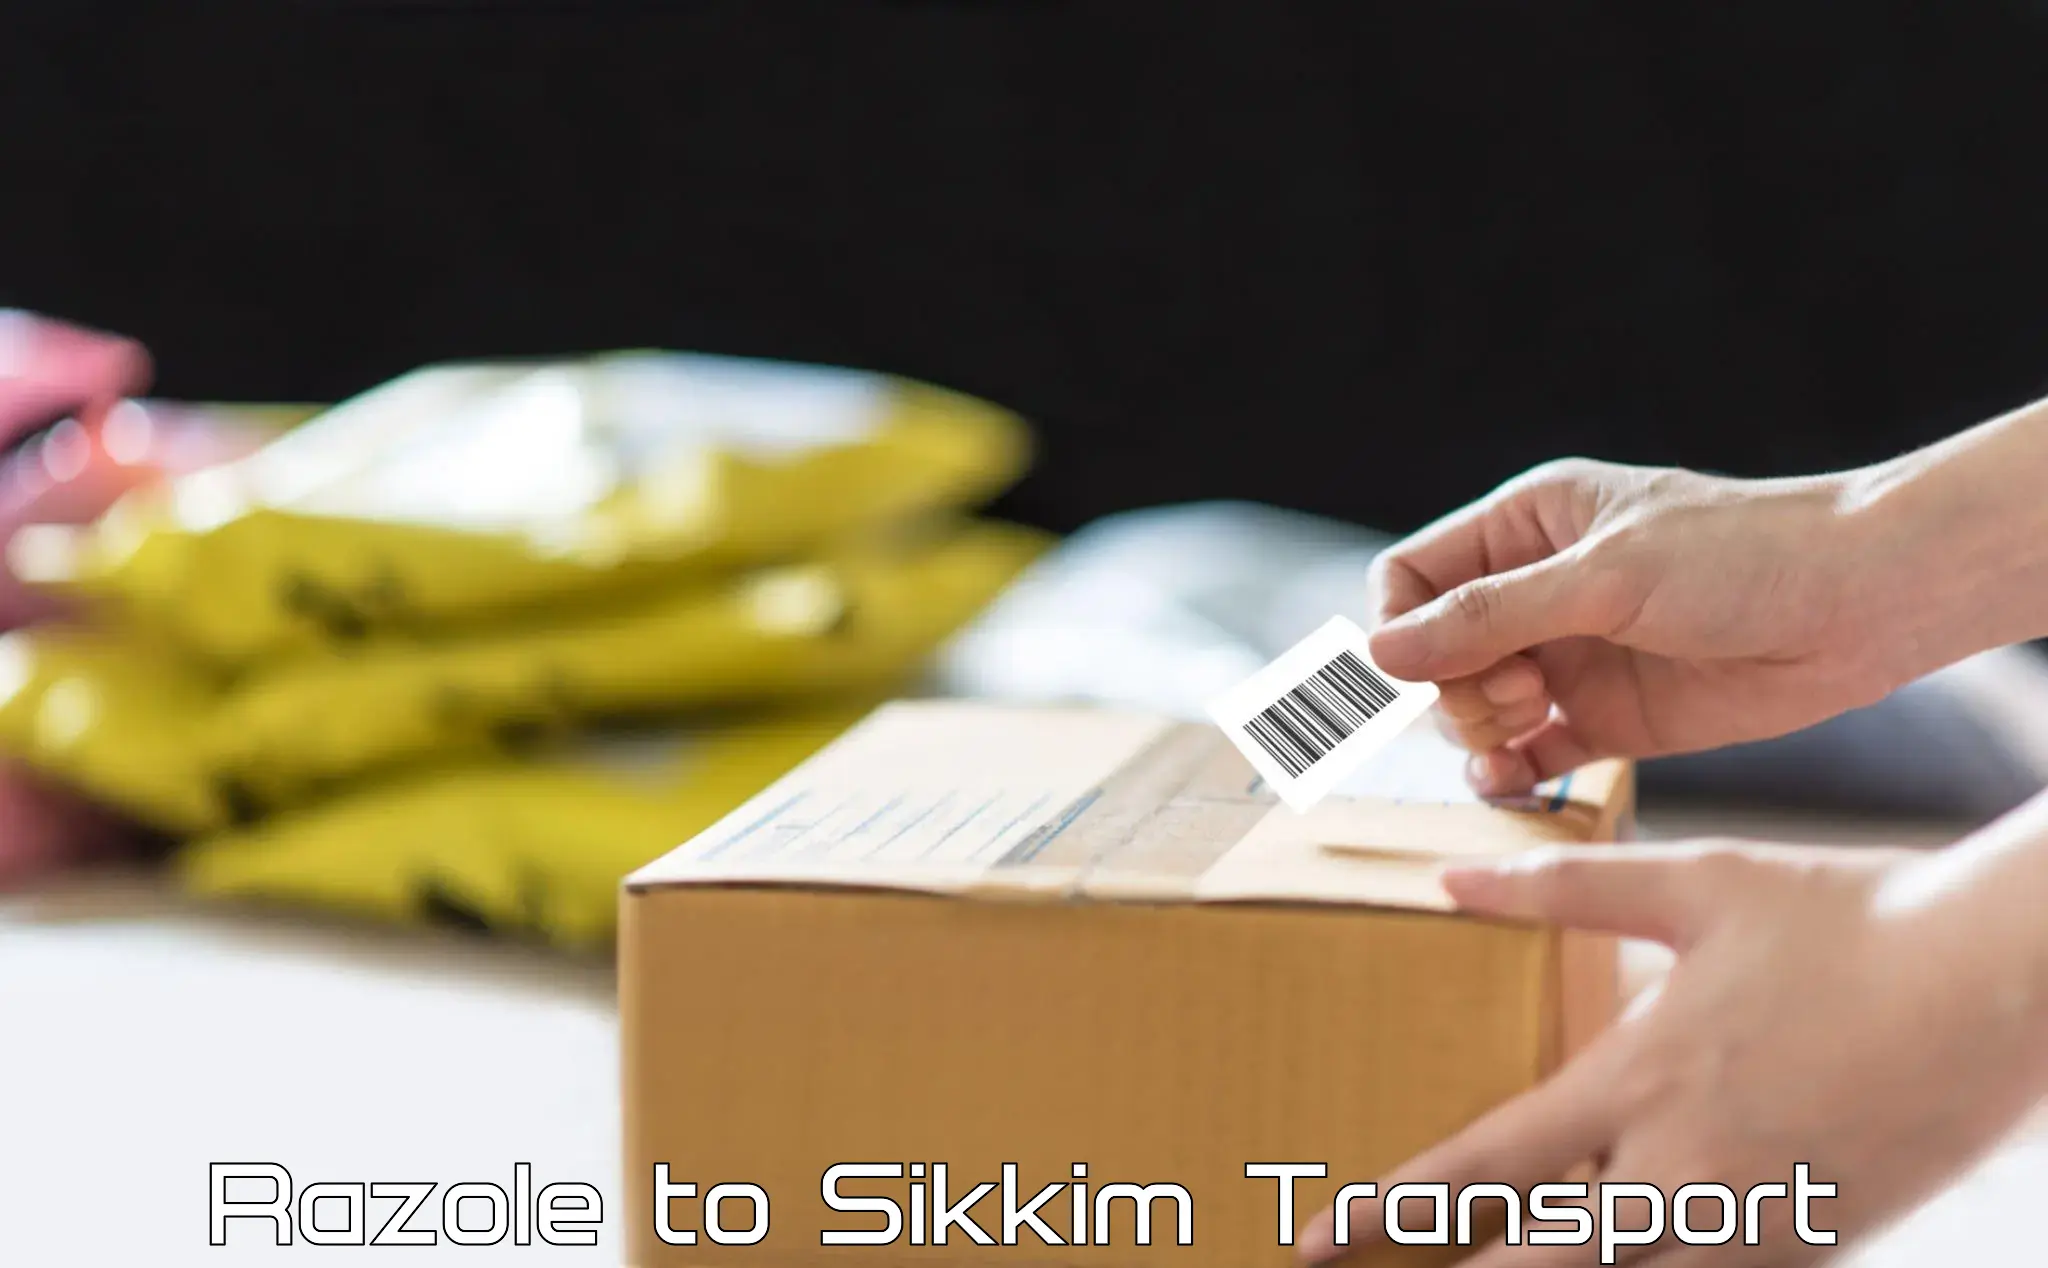 Container transport service Razole to East Sikkim